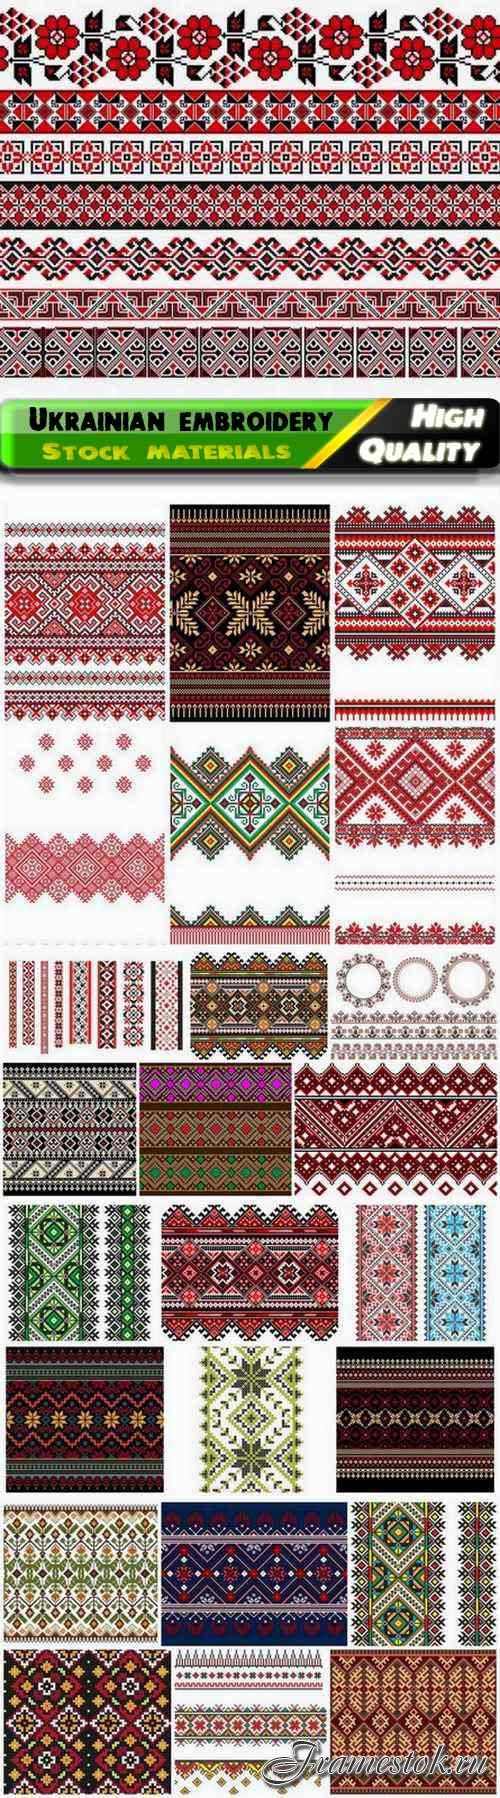 National Ukrainian embroidery ornament and pattern - 25 Eps